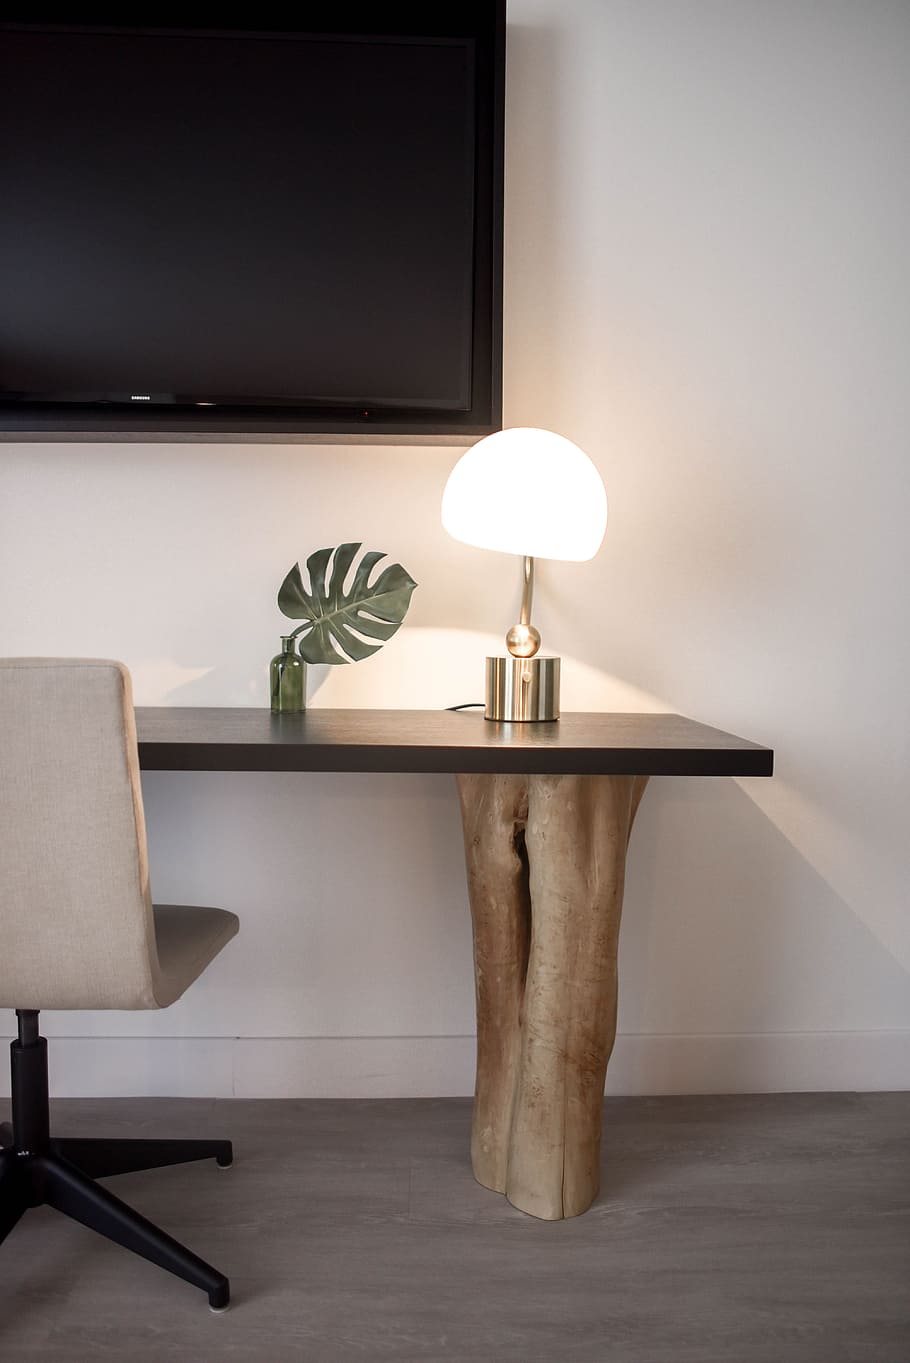 Stainless Steel Base White Shade Table Lamp on Brown Wooden Desk Near White Painted Wall With Wall Mounted Flat Screen T V